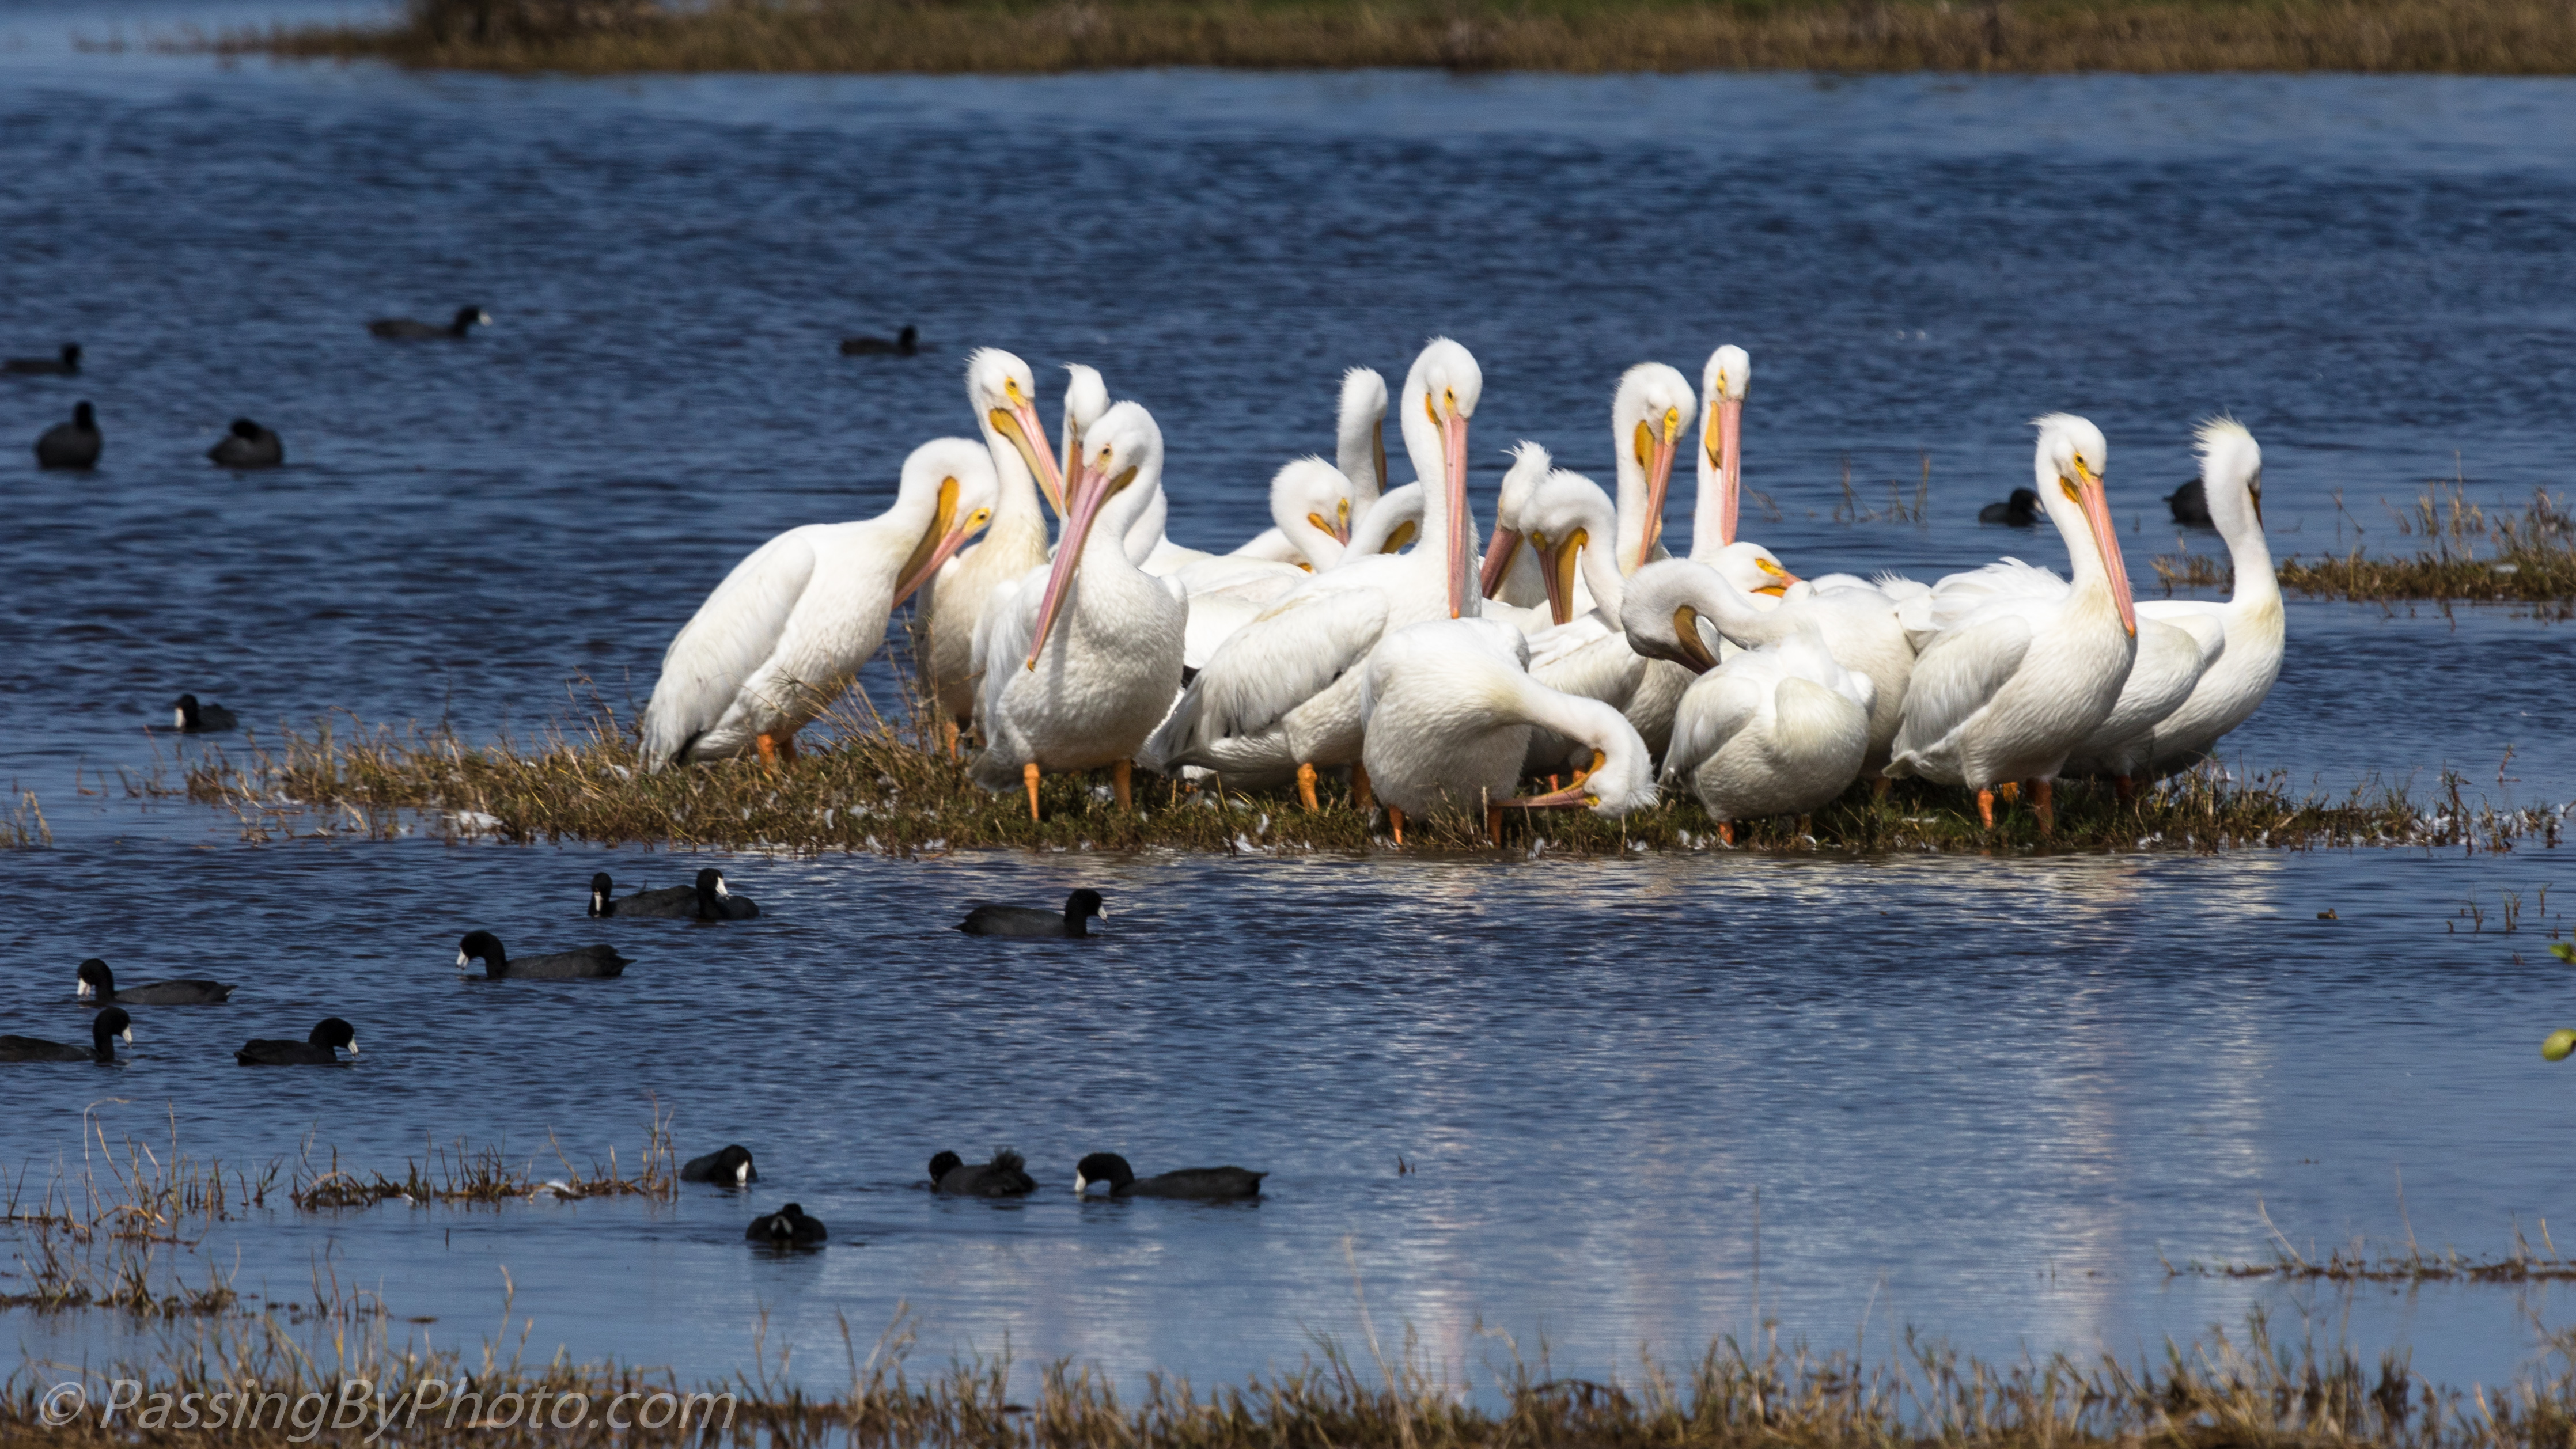 Resting American White Pelicans | Passing By Photo